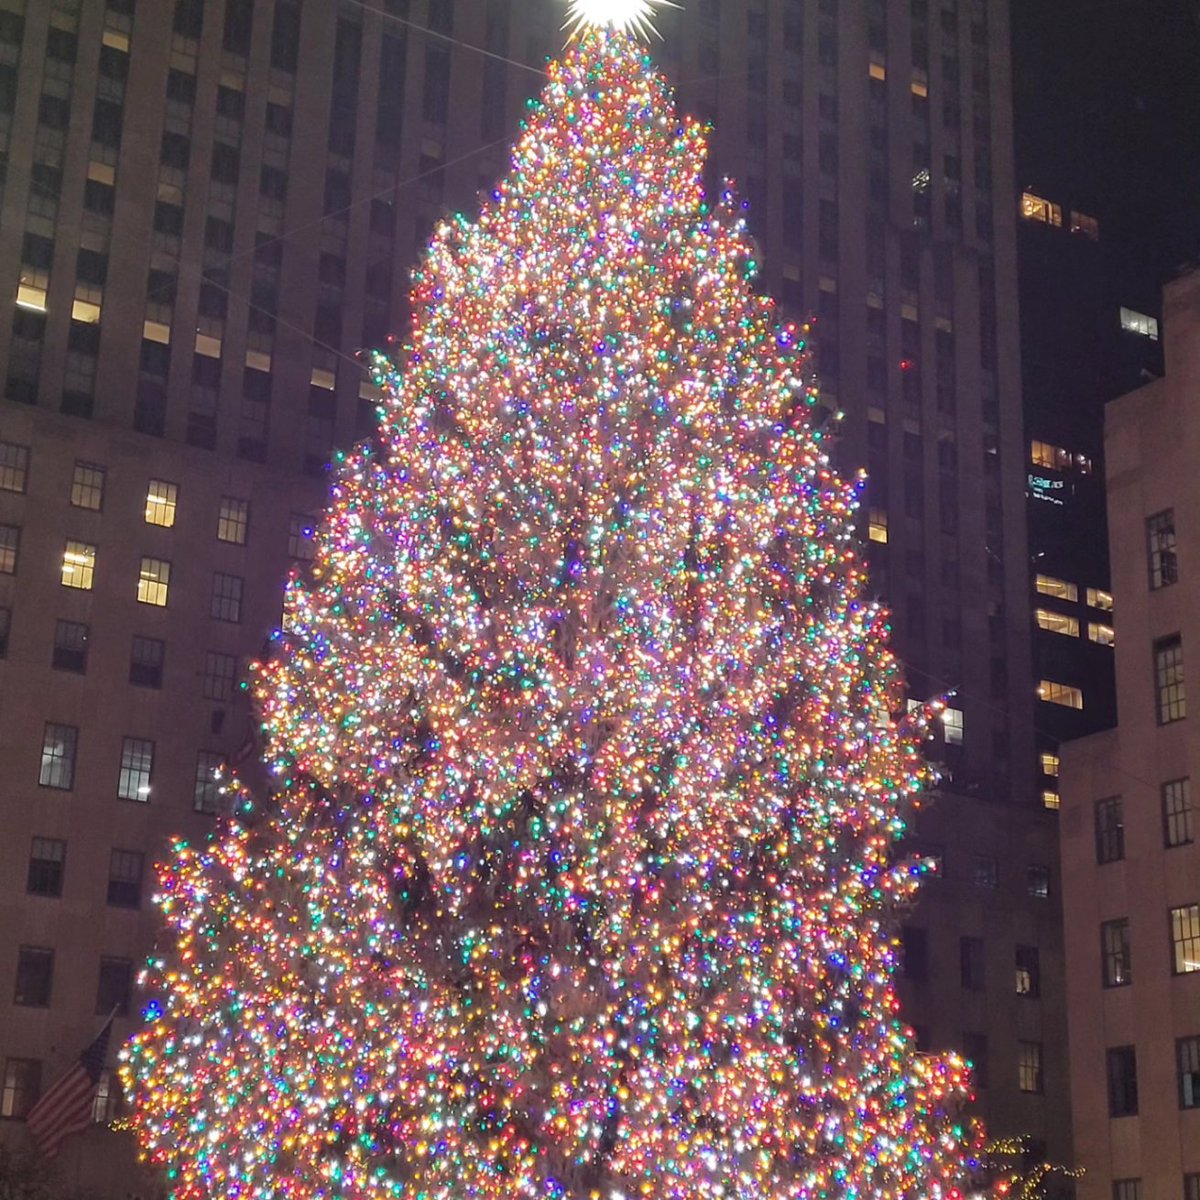 Merry Christmas 🎅 everybody from Rockefeller Center have a good and blessed day  #daruddway #christmasinnyc #30rock #rockerfellercenter #rockerfellercenterchristmastree